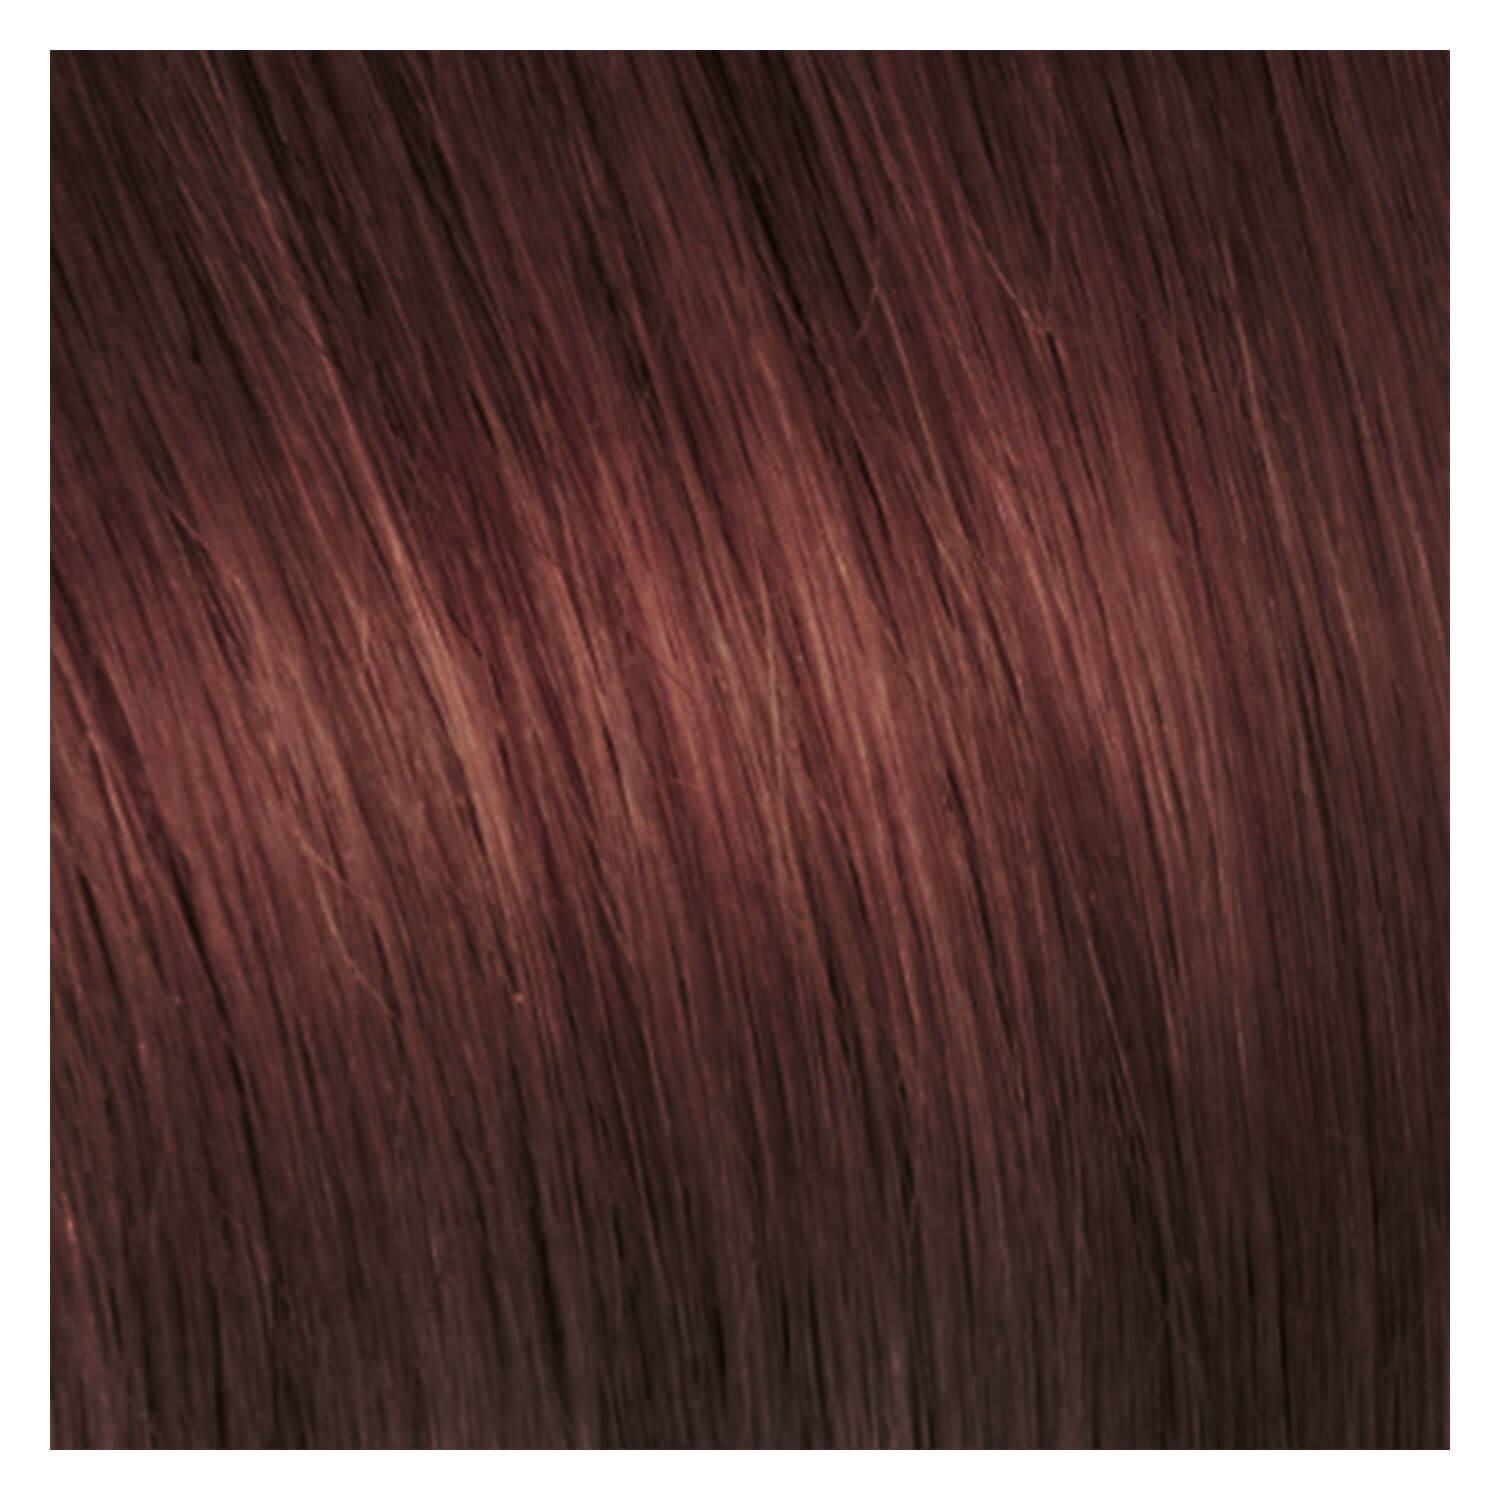 SHE Tape In-System Hair Extensions Straight - 32 Mahogany Chestnut Brown 55/60cm